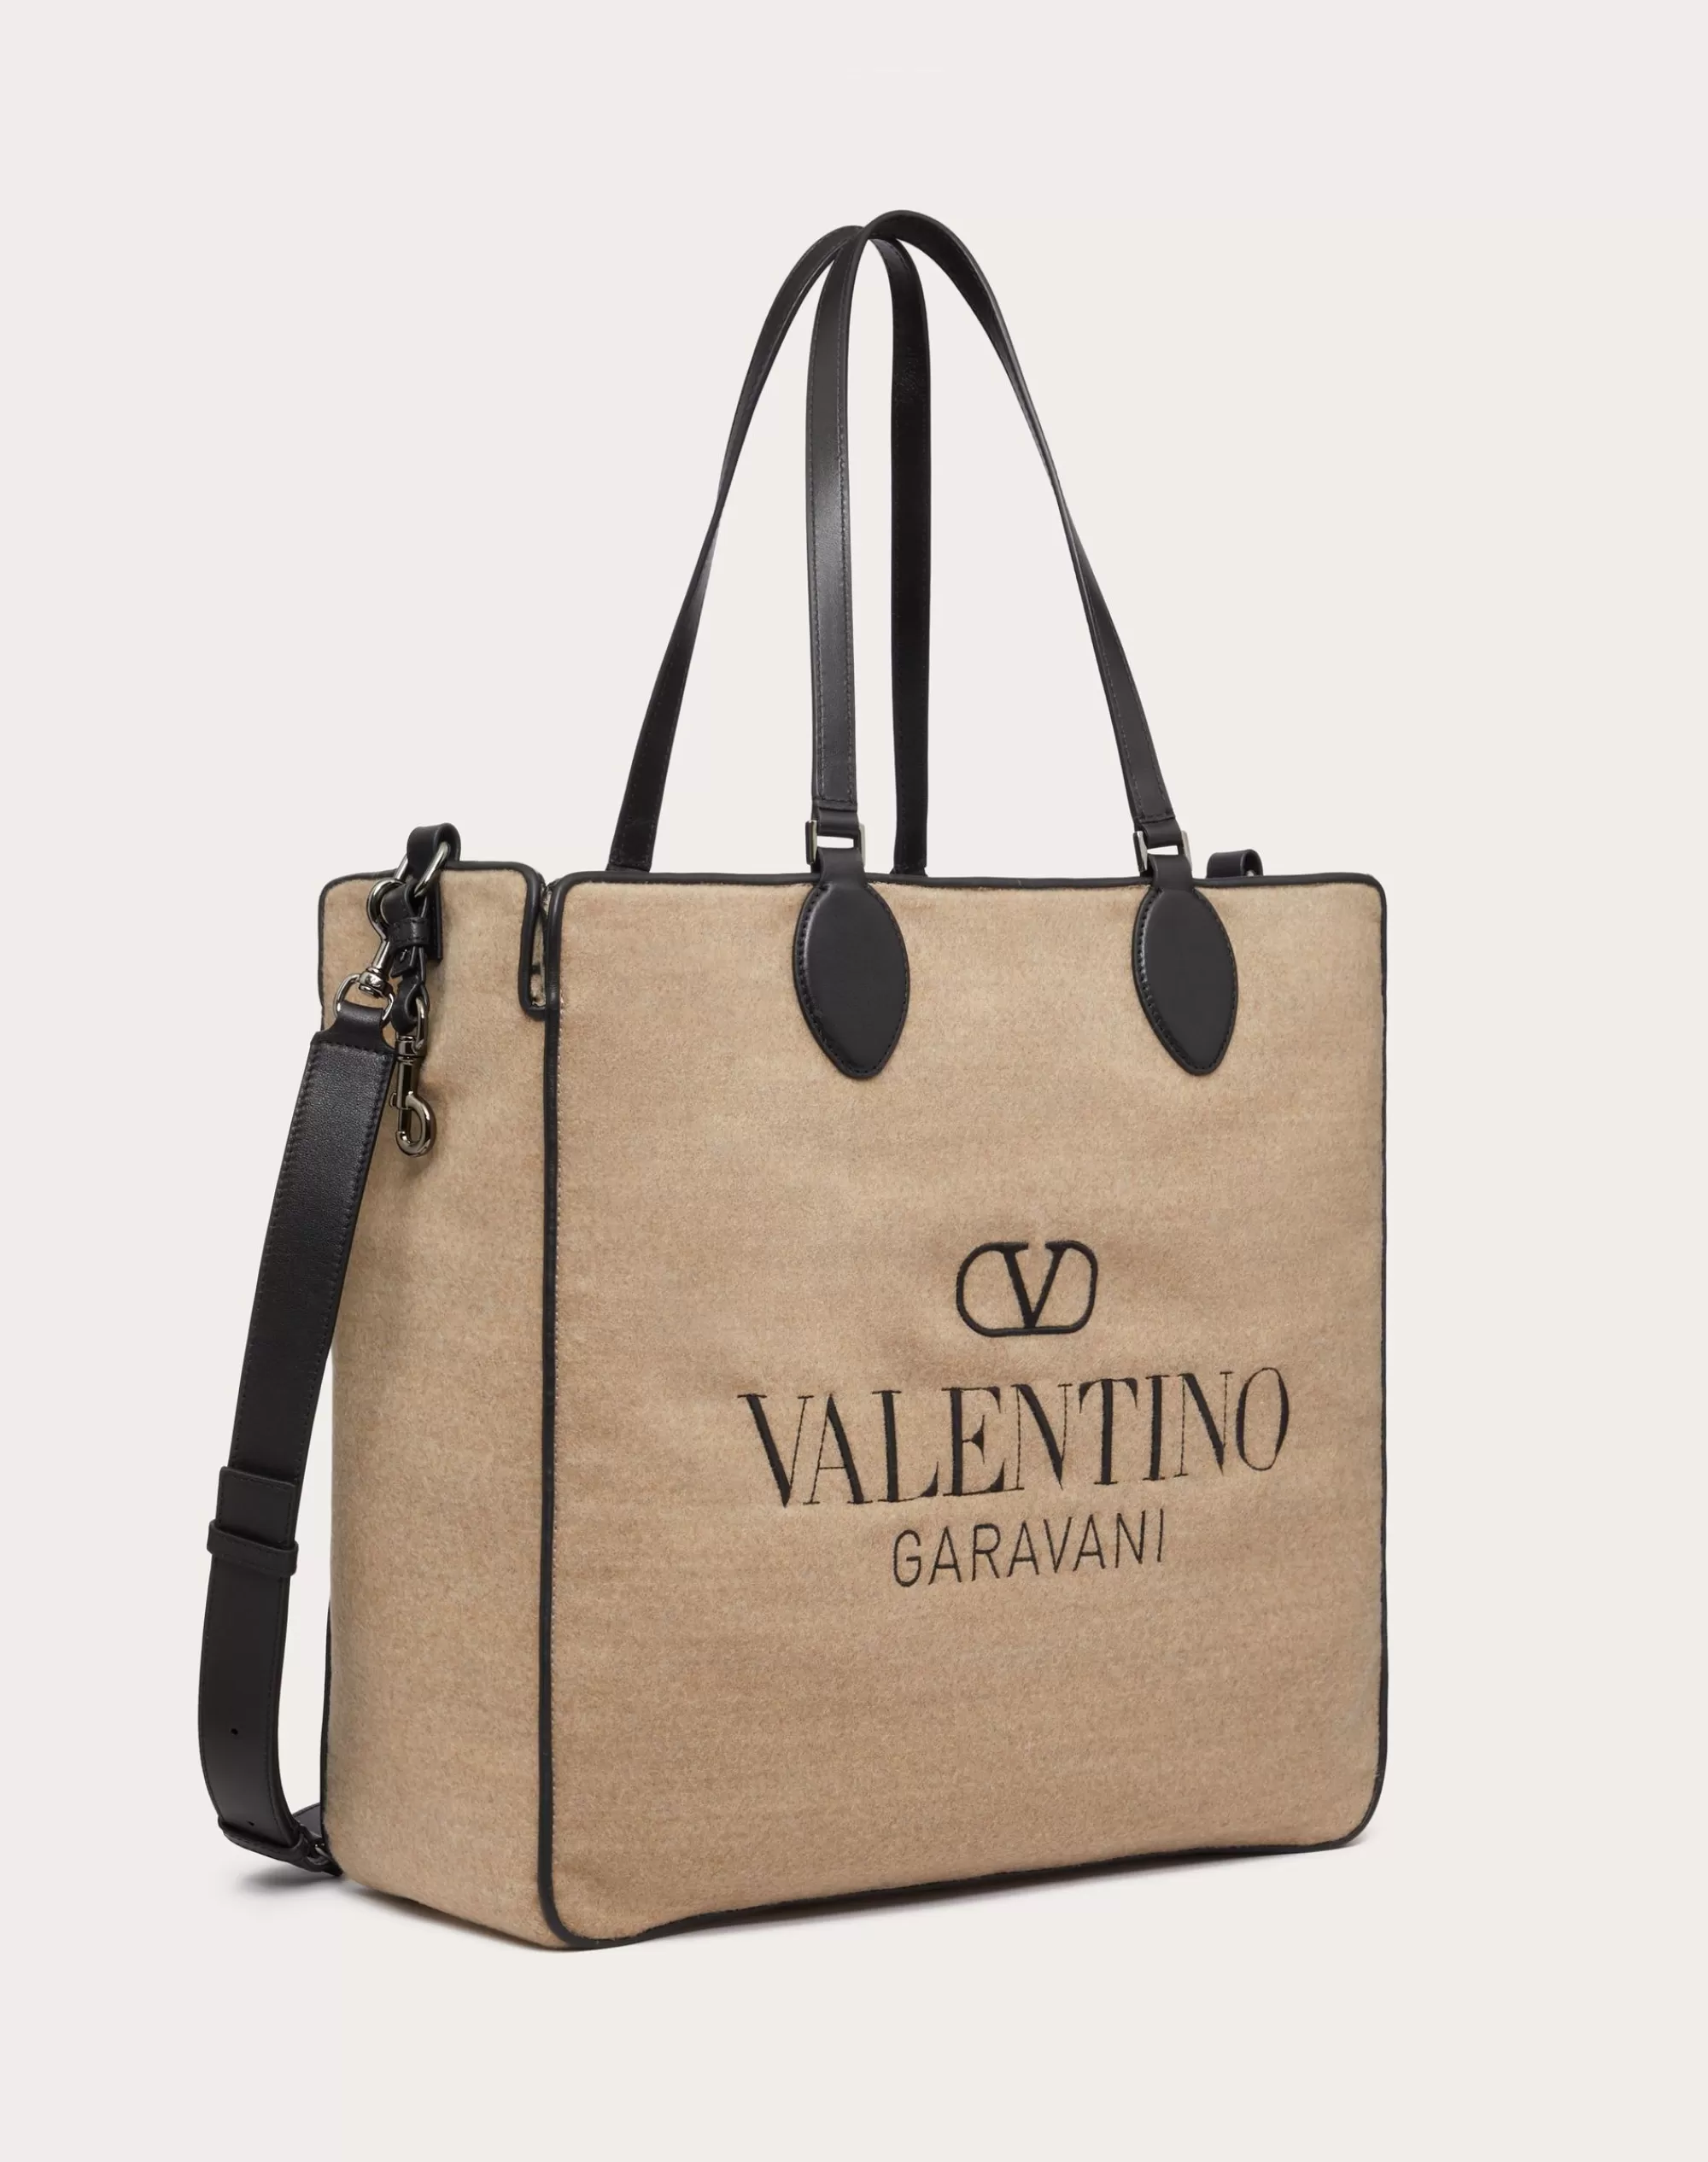 Valentino TOILE ICONOGRAPHE SHOPPING BAG IN WOOL WITH LEATHER DETAILS Beige/black Cheap